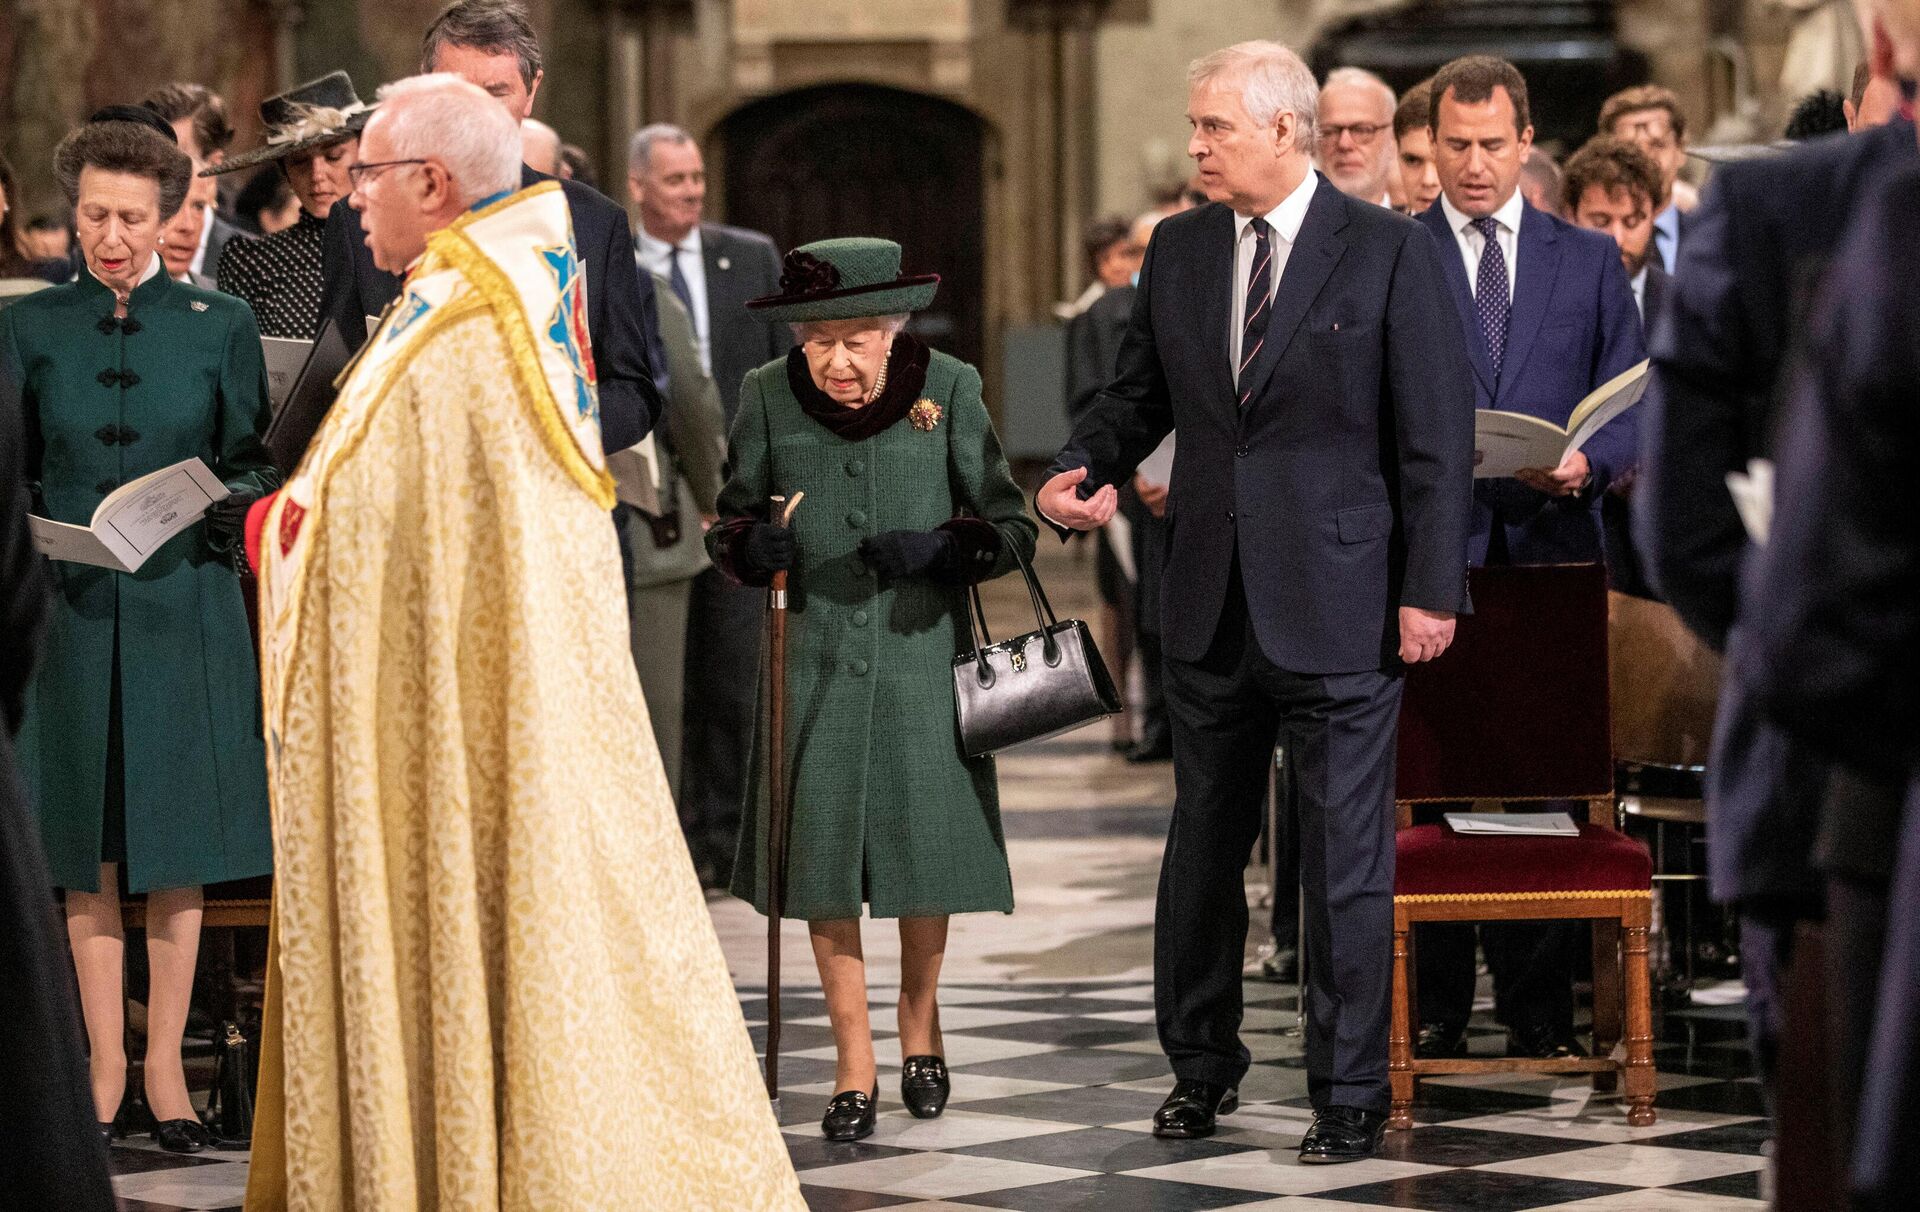 Britain's Queen Elizabeth, accompanied by Prince Andrew, Duke of York, attends a service of thanksgiving for late Prince Philip, Duke of Edinburgh, at Westminster Abbey in London, Britain, March 29, 2022 - Sputnik International, 1920, 02.04.2022